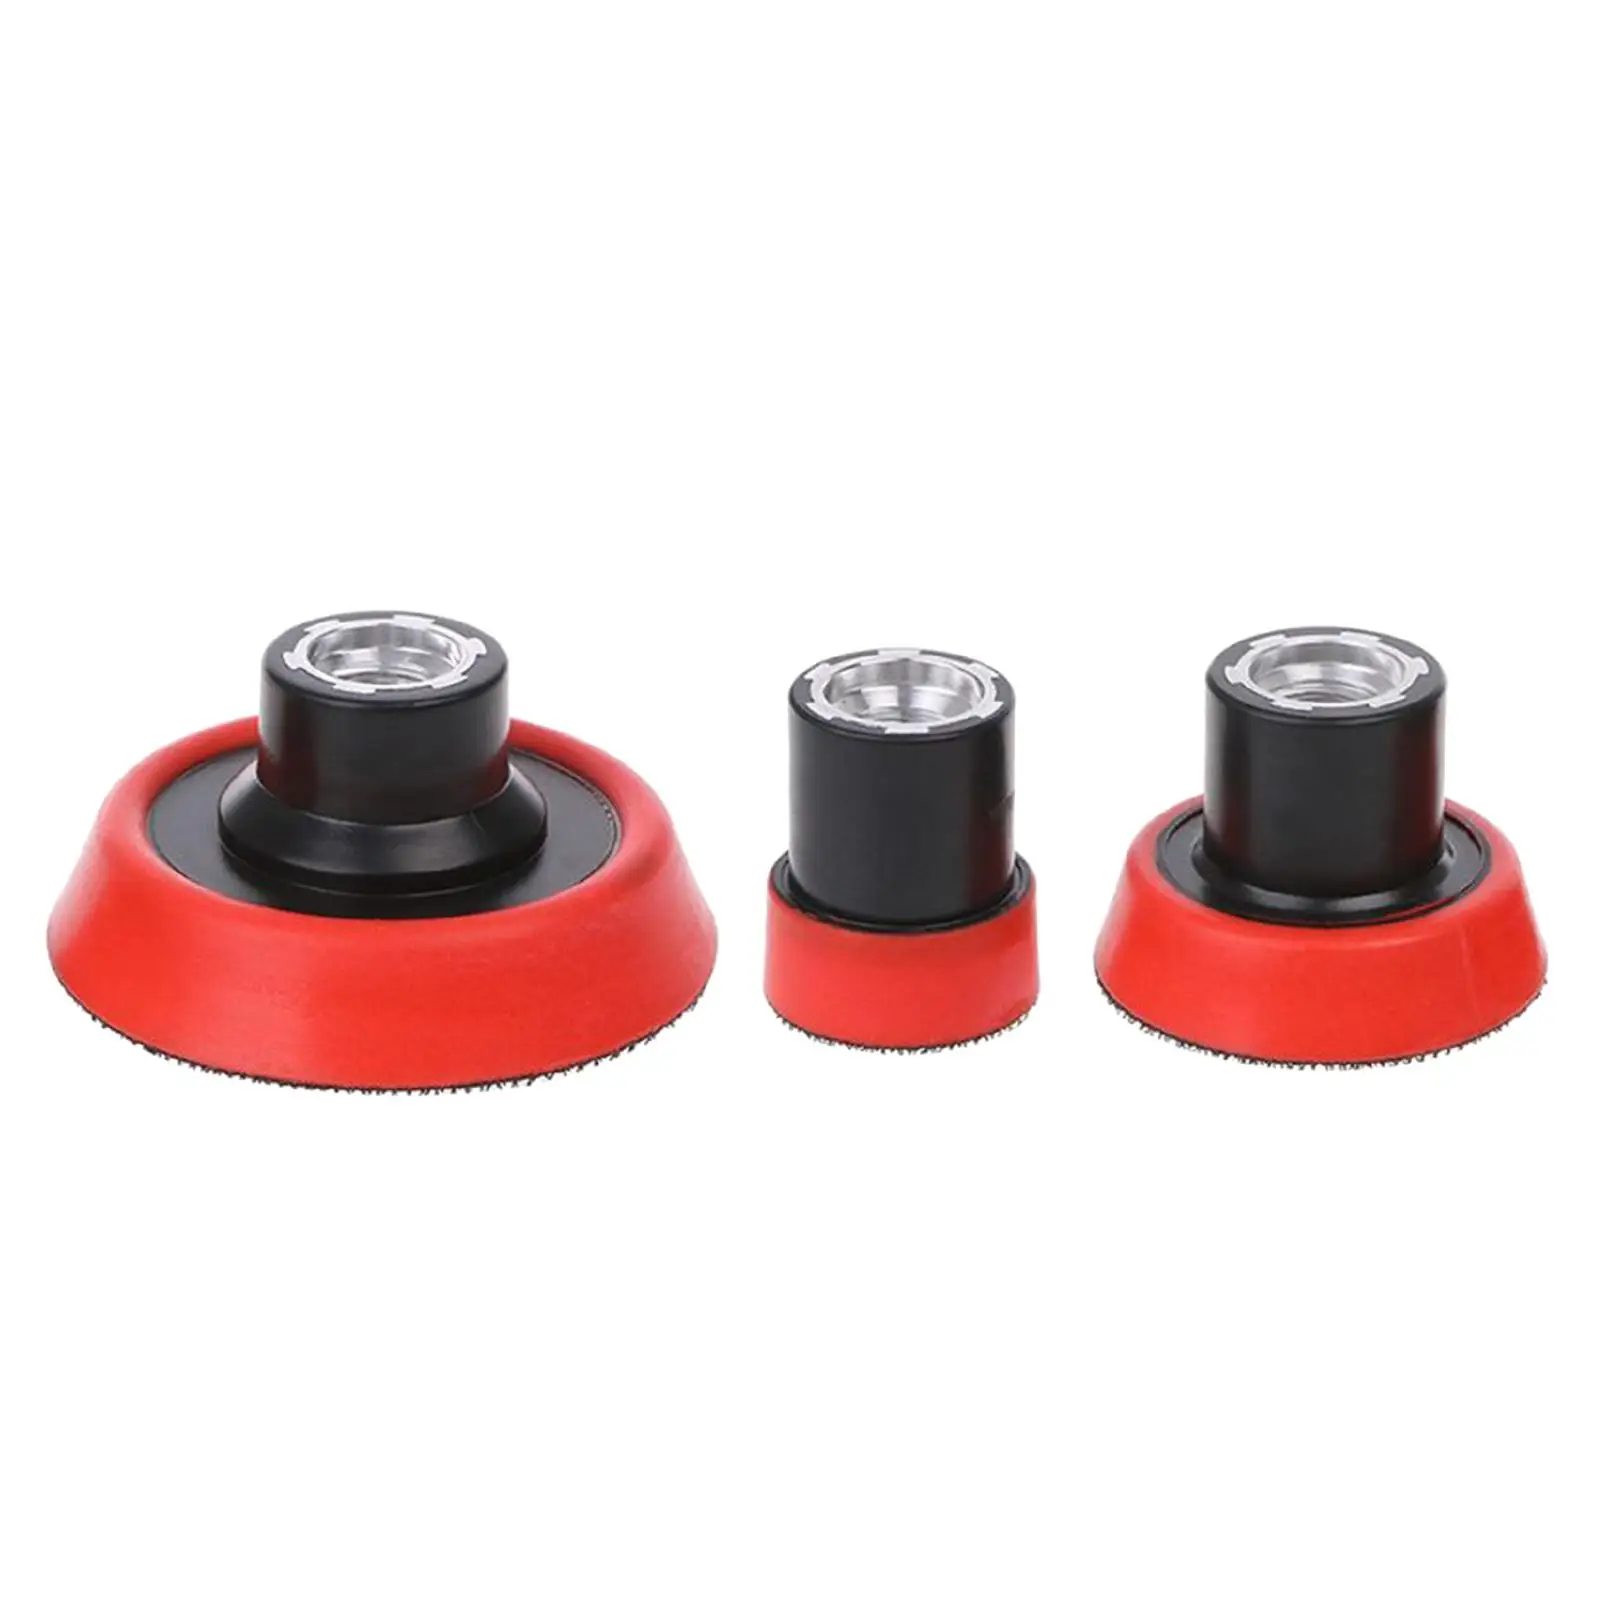 3 Pieces Polisher Set Backer Buffering M14 Backing Plate for Detailing Car  Care